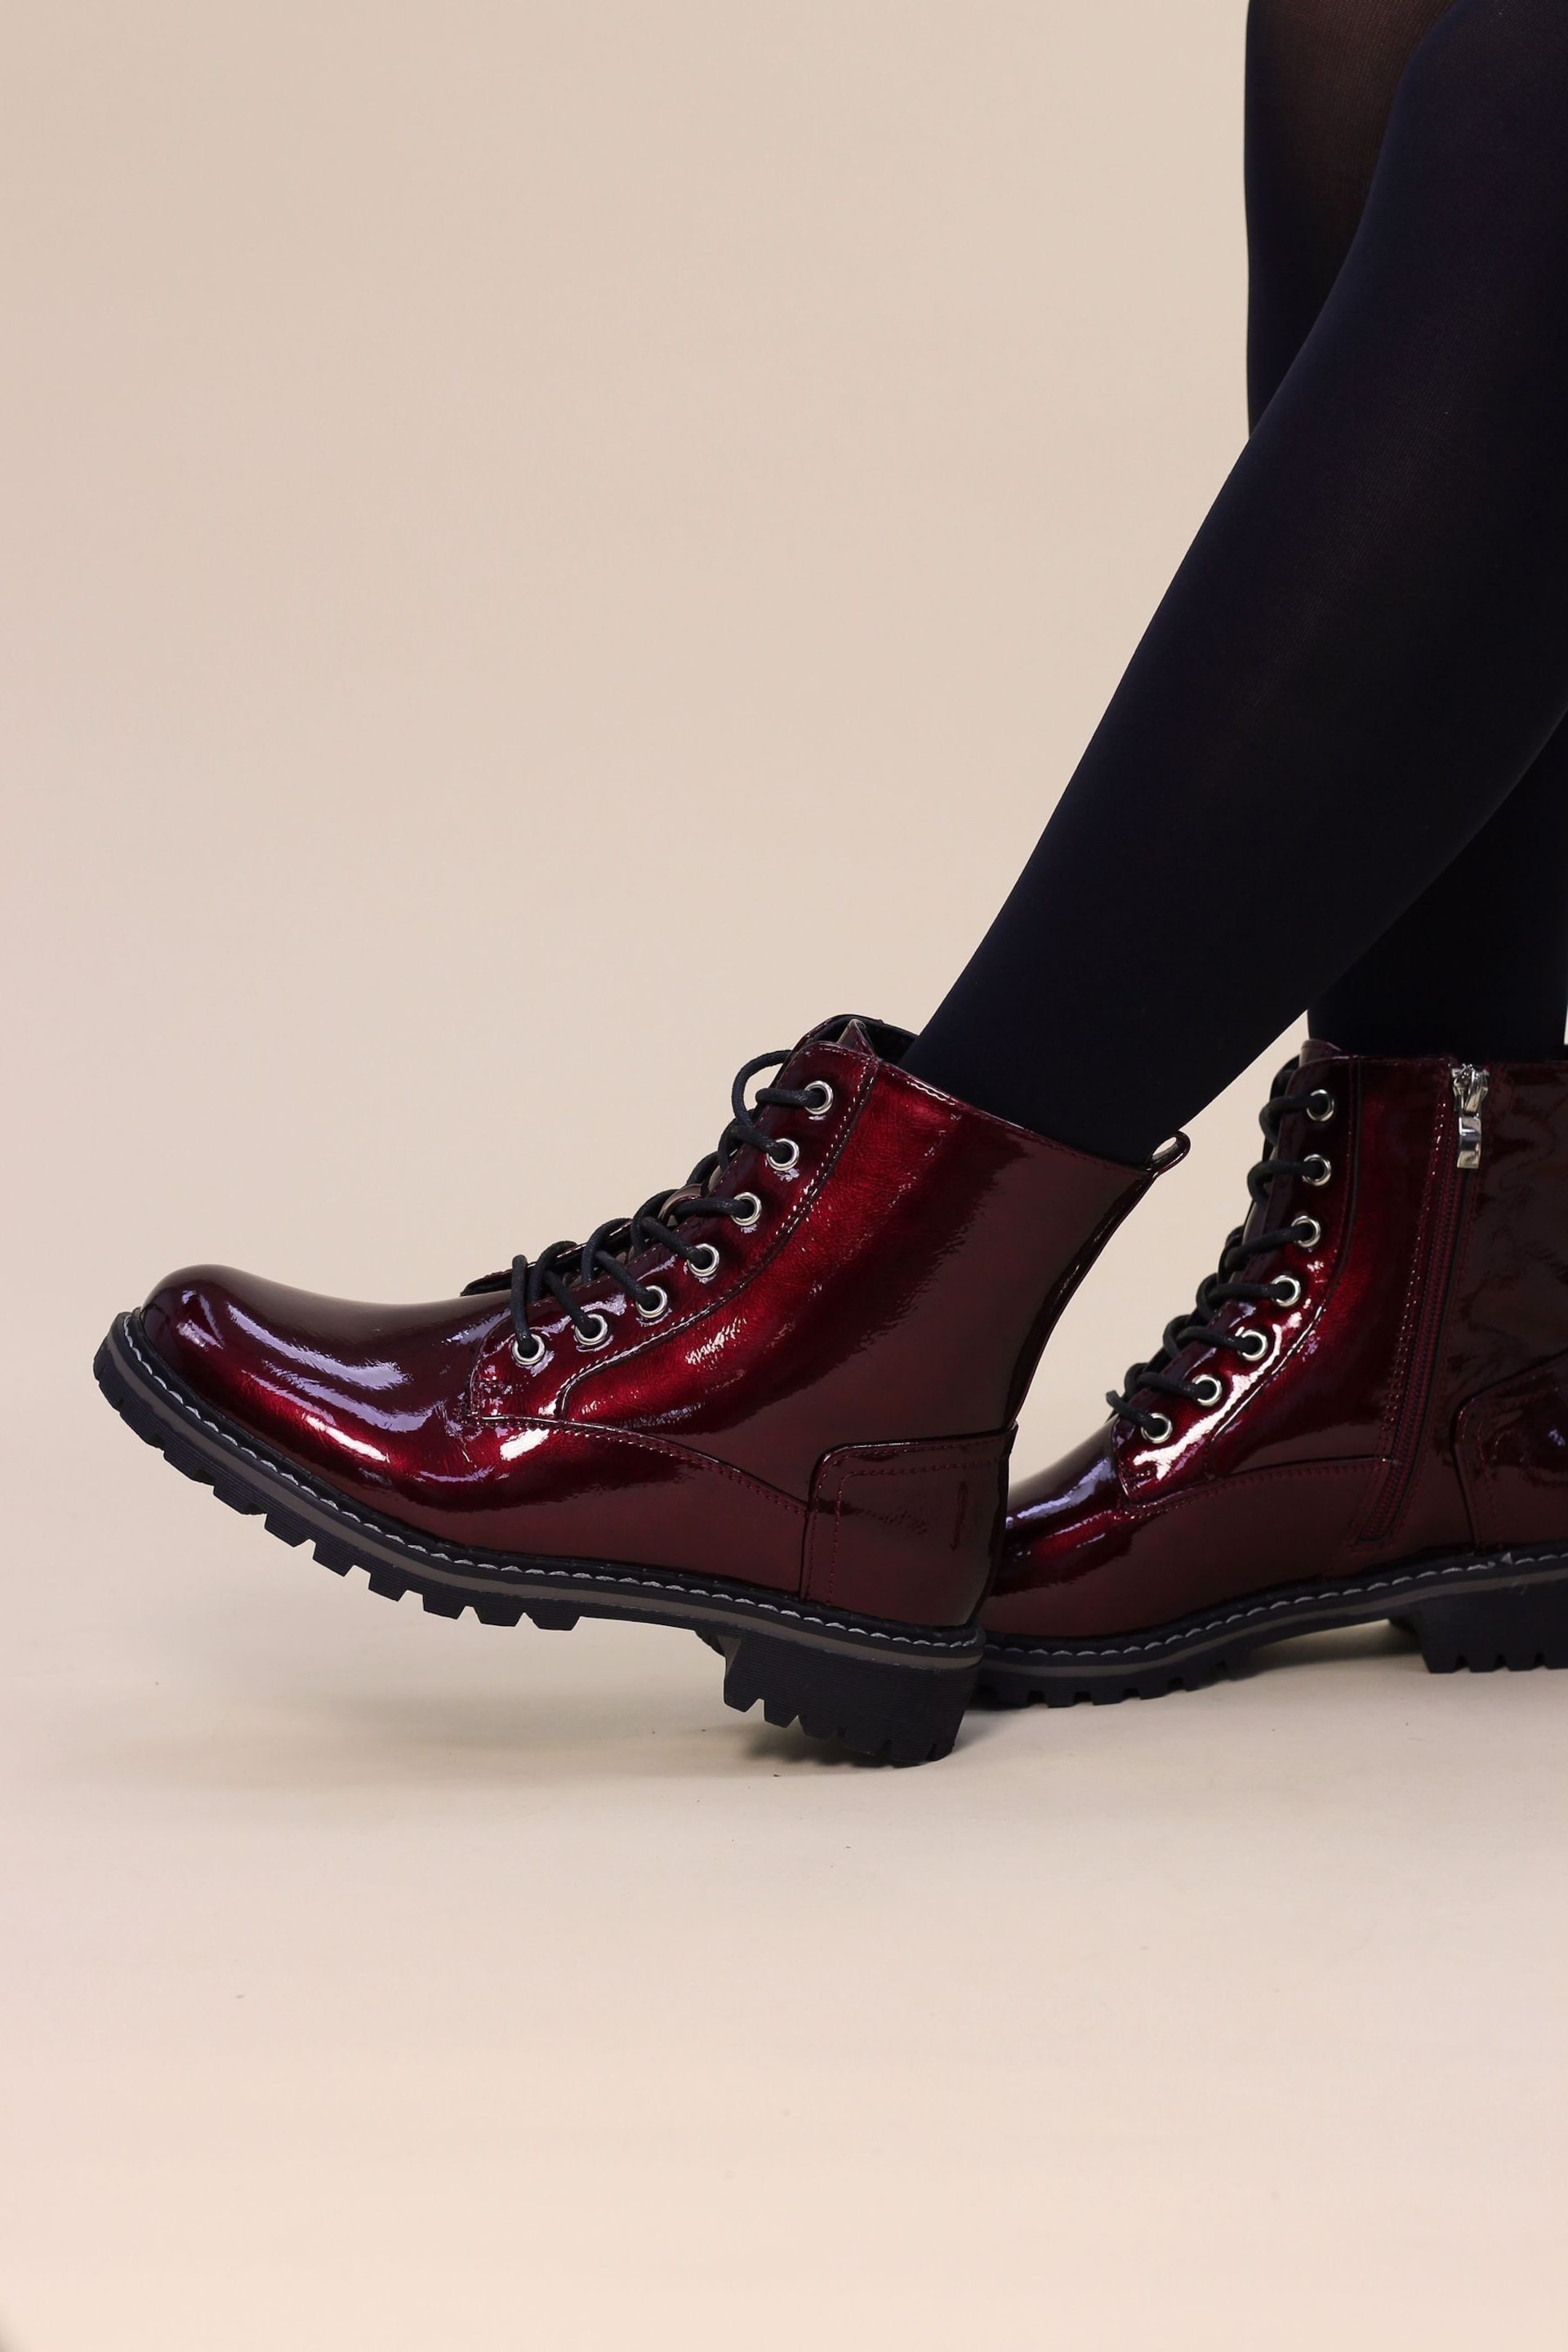 Lunar Burgundy Red Danni Patent Ankle Boots - Image 9 of 9